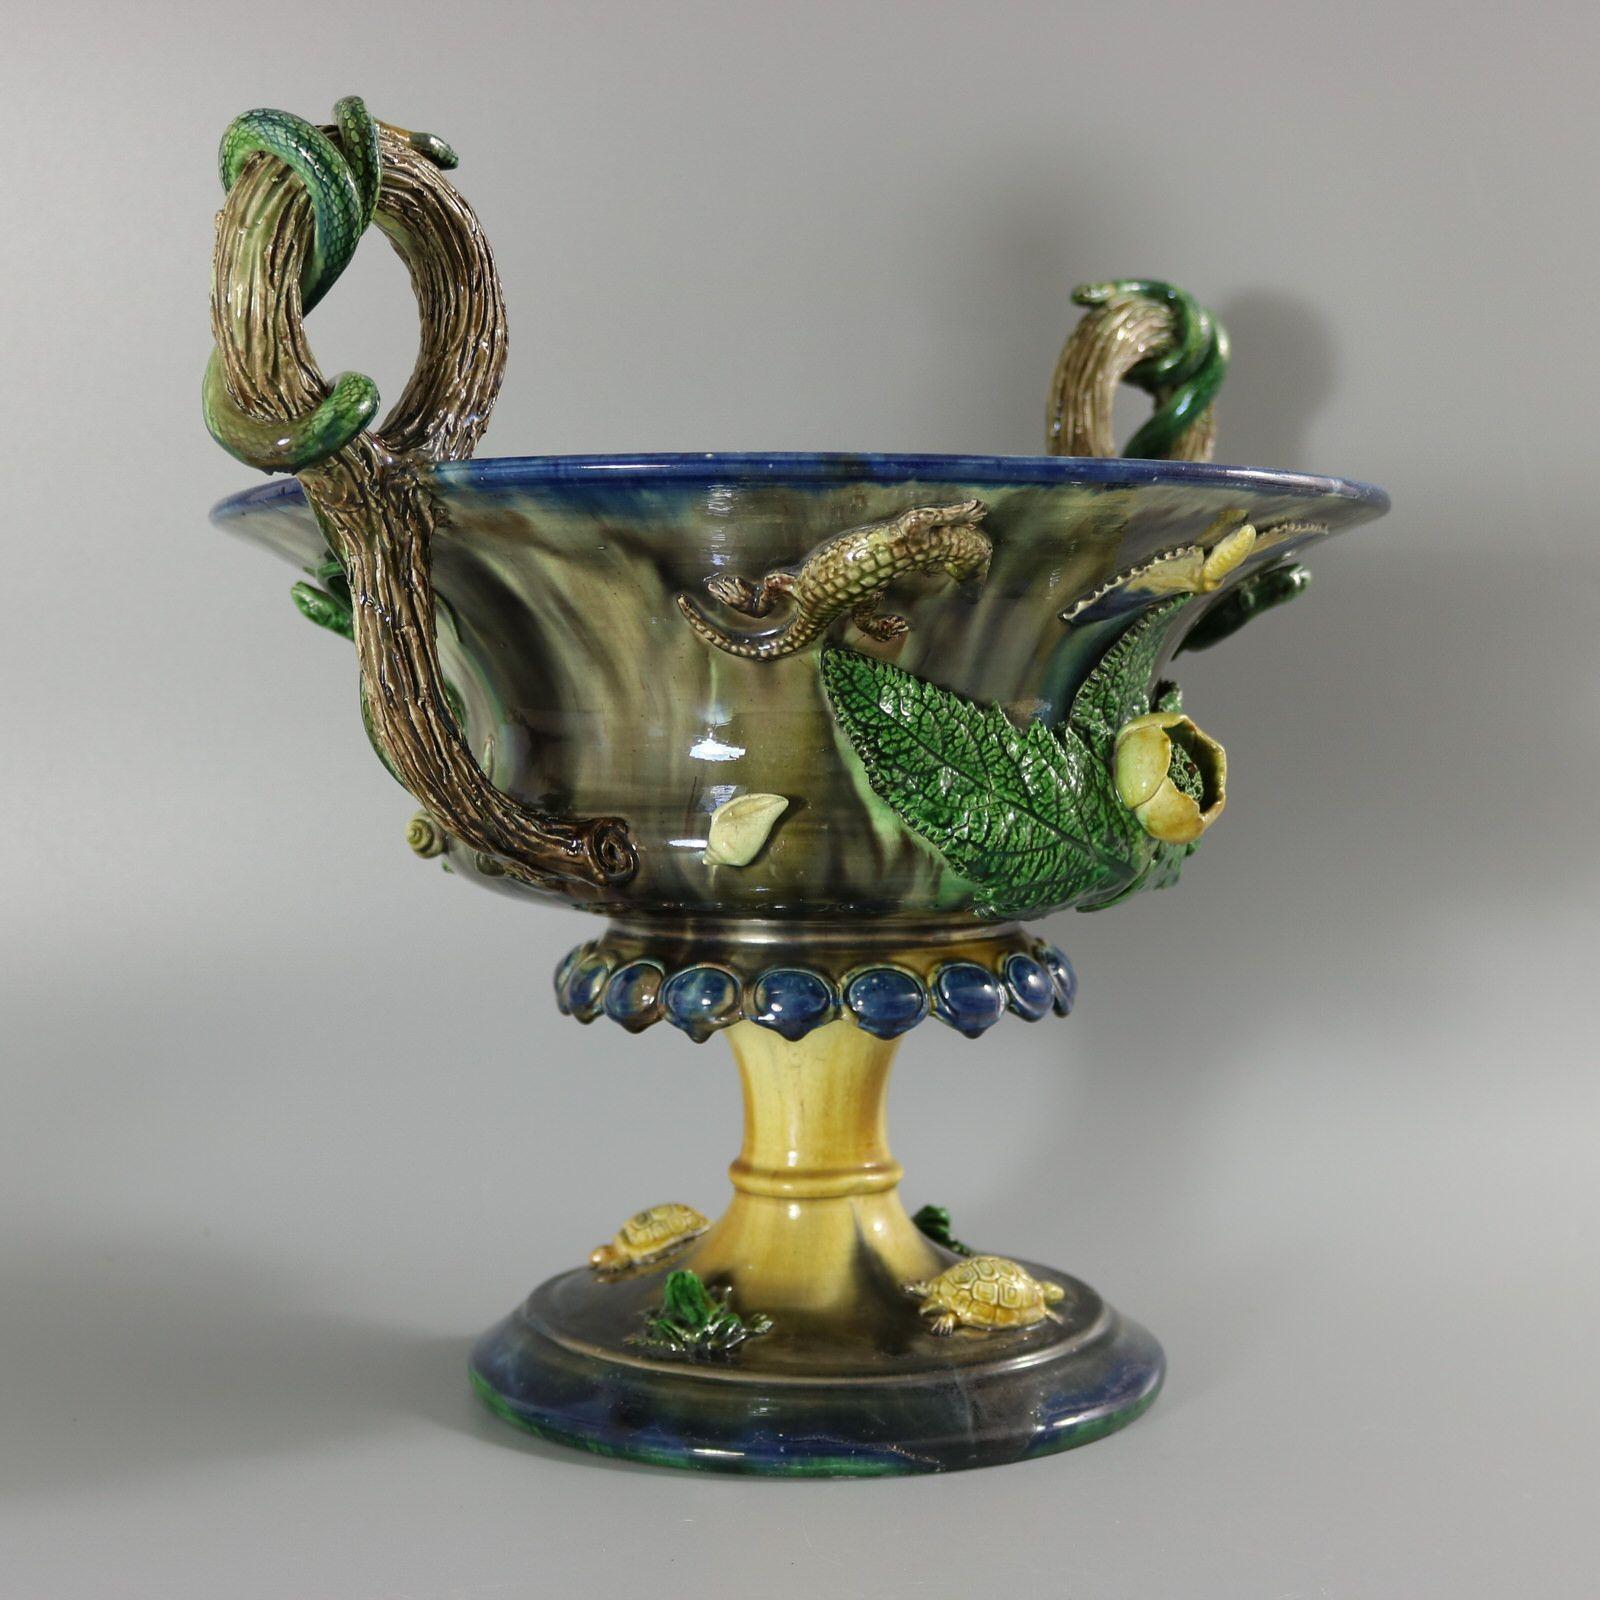 19th Century French Palissy Majolica Jardiniere with Snake Handles